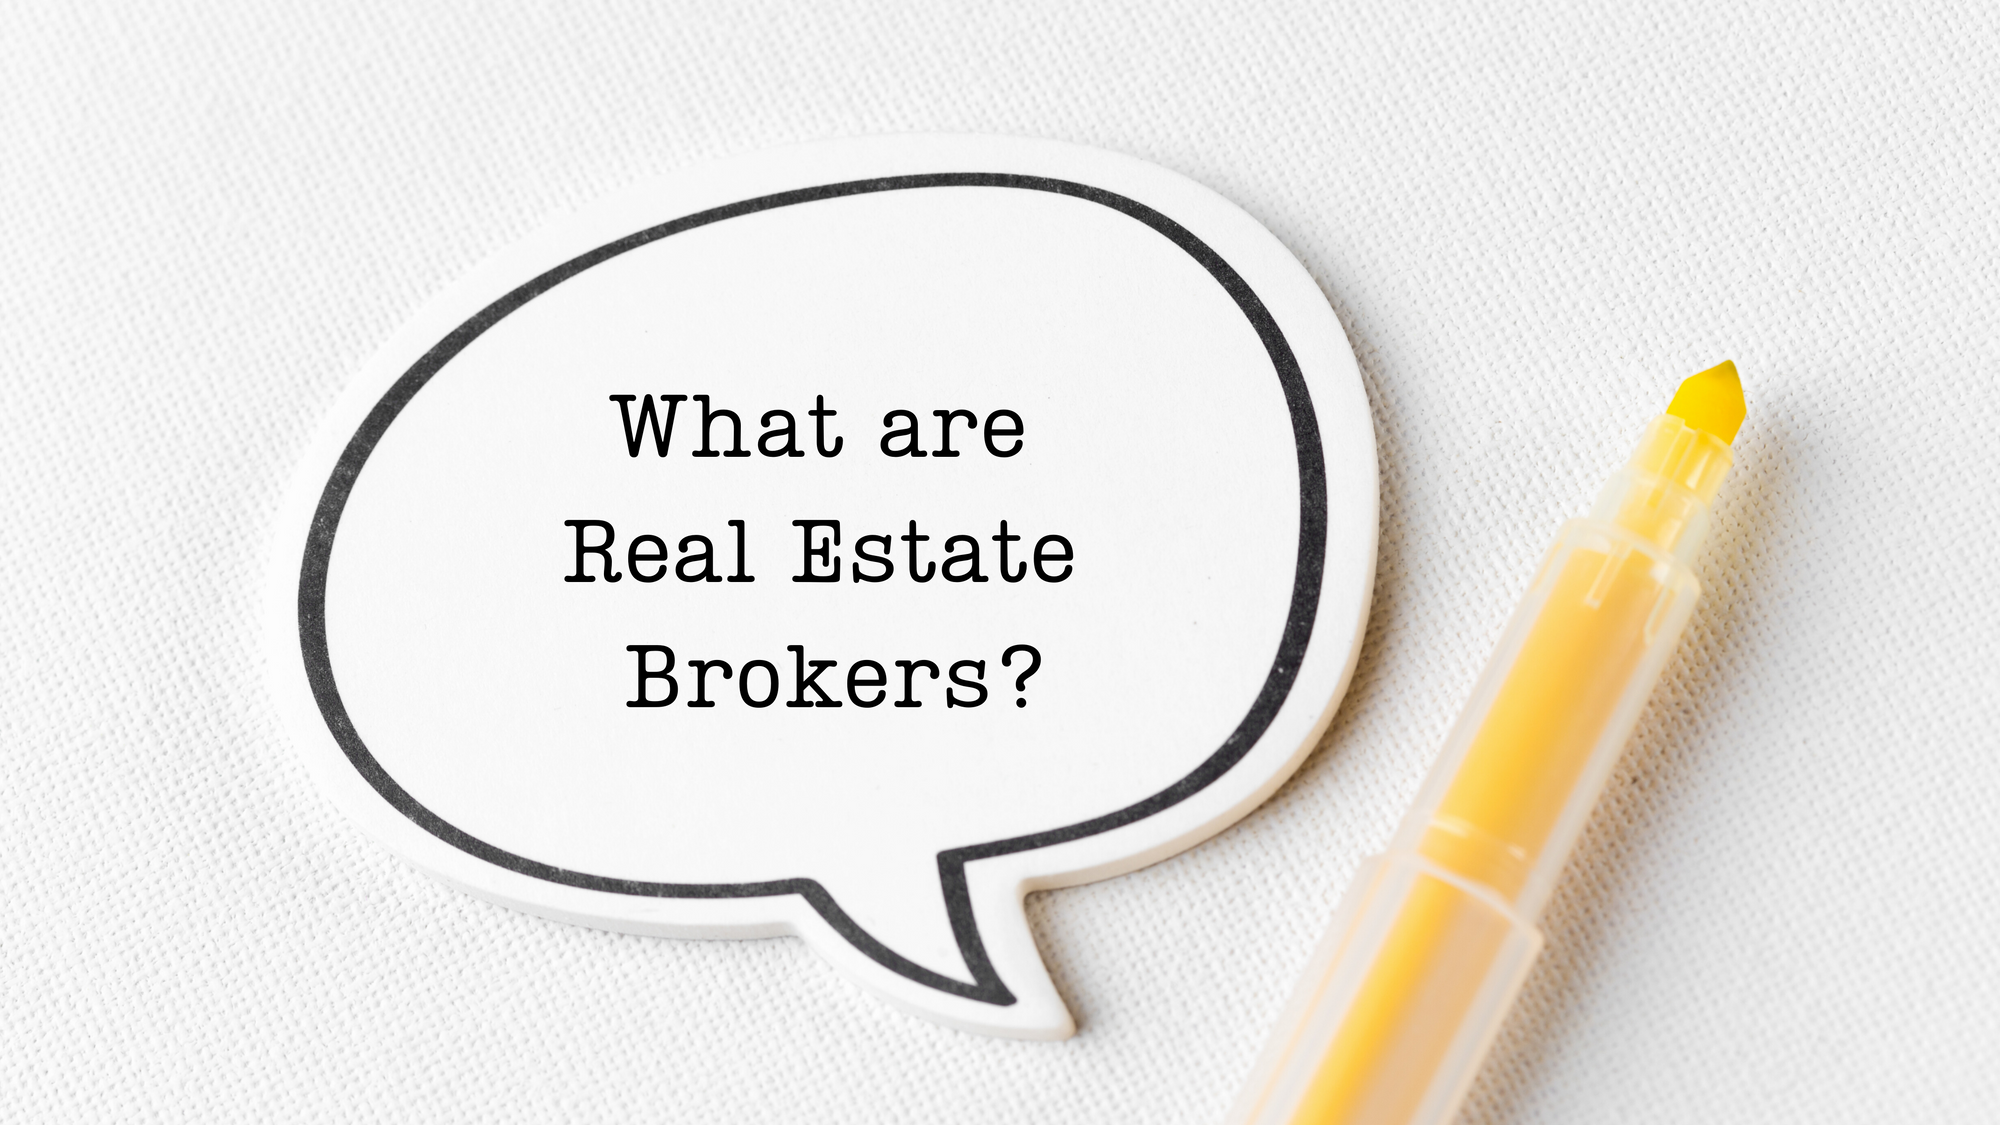 What Are Real Estate Brokers?